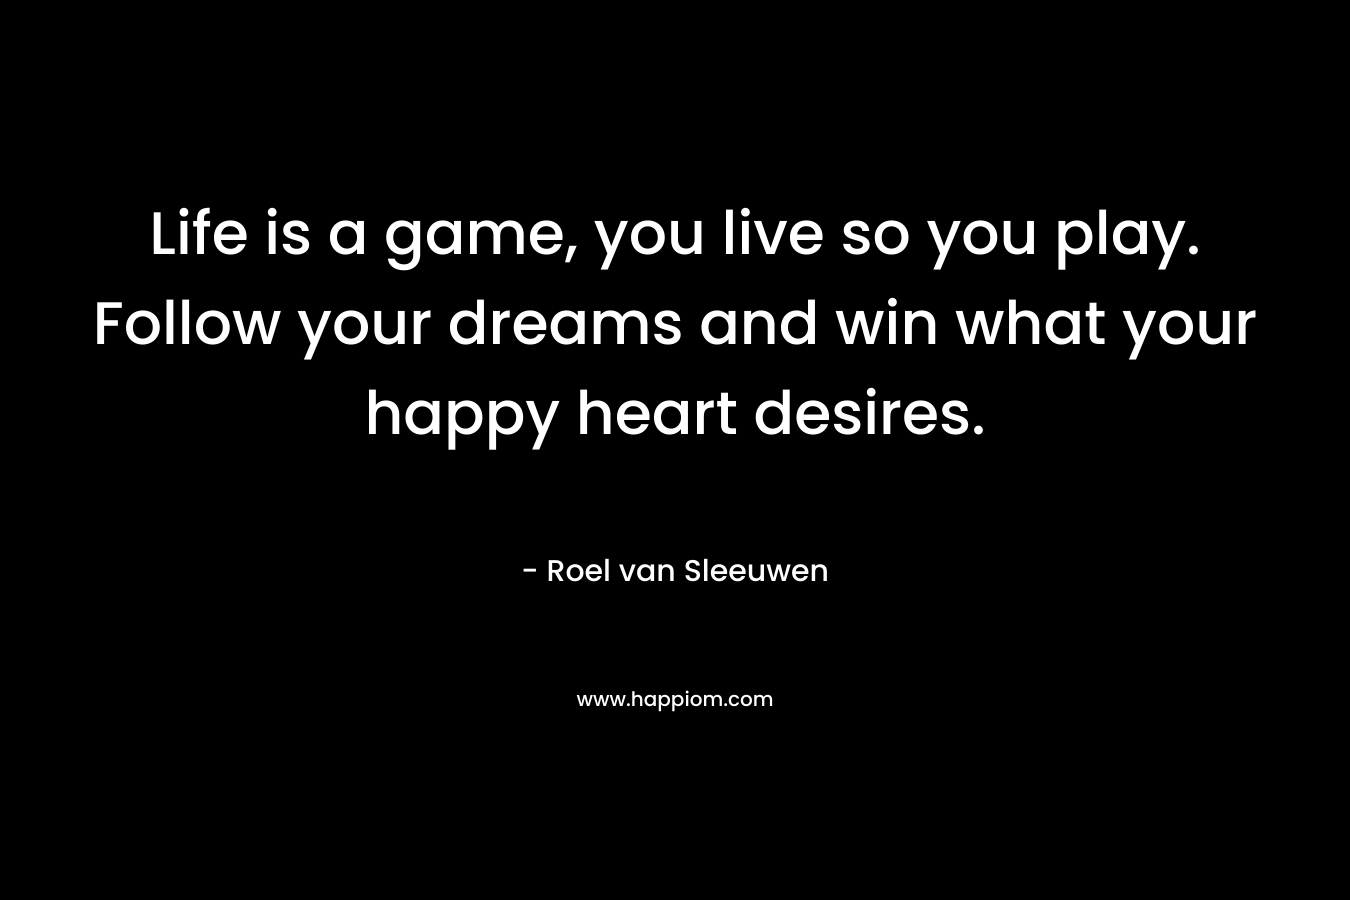 Life is a game, you live so you play. Follow your dreams and win what your happy heart desires.